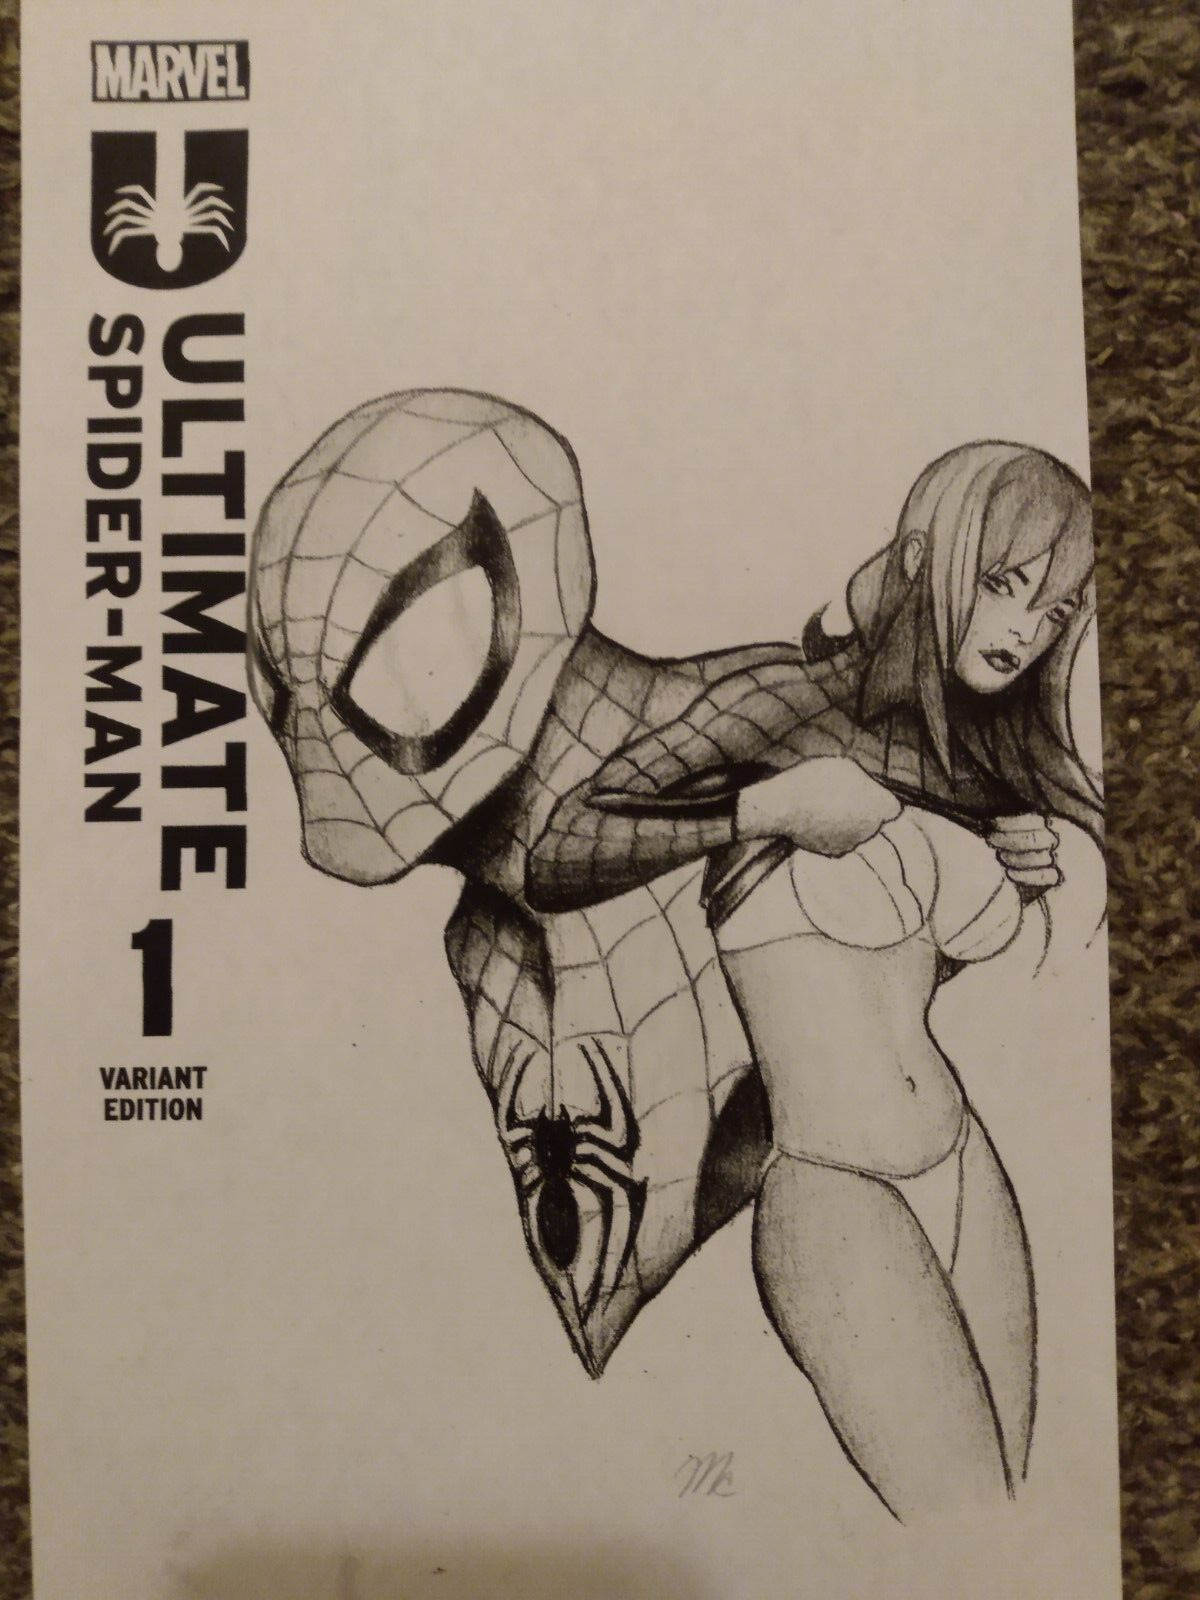 SPIDERMAN MARY JANE ORIGINAL SKETCH COVERS COMIC ART DRAWING NOT A PRINT